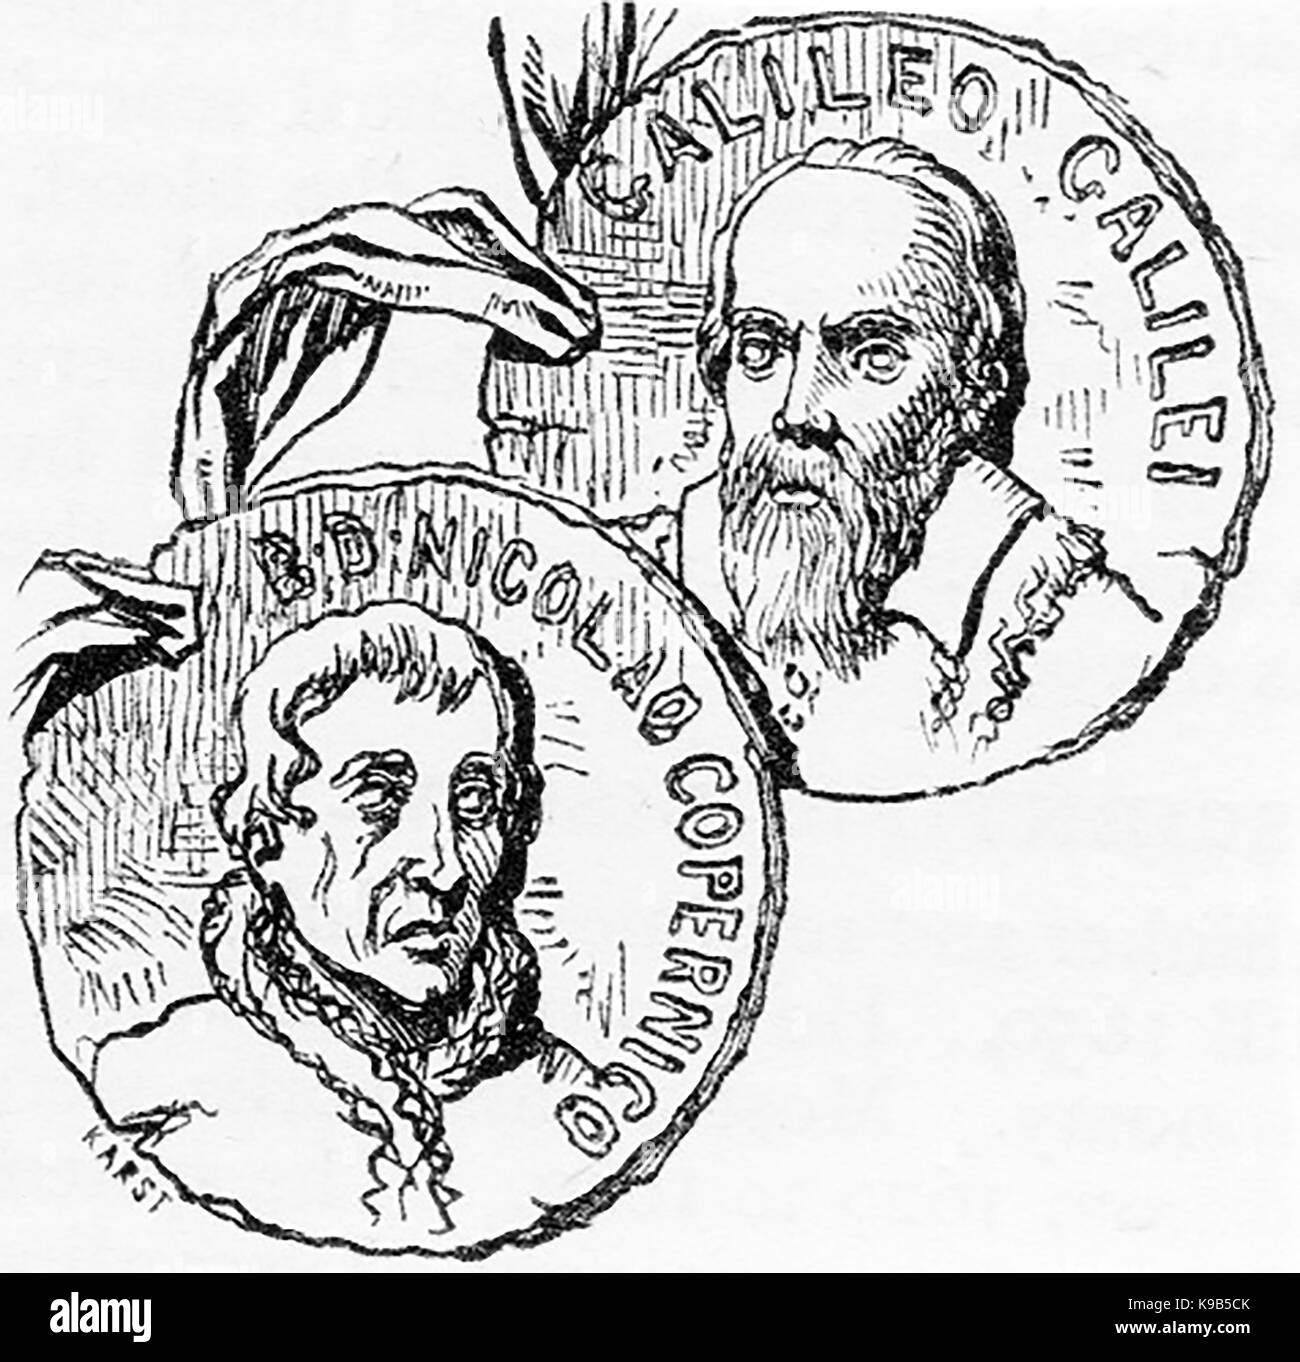 A 1910 sketch of medallions showing portraits of Galileo Galilei & Nicolaus Copernicus Stock Photo